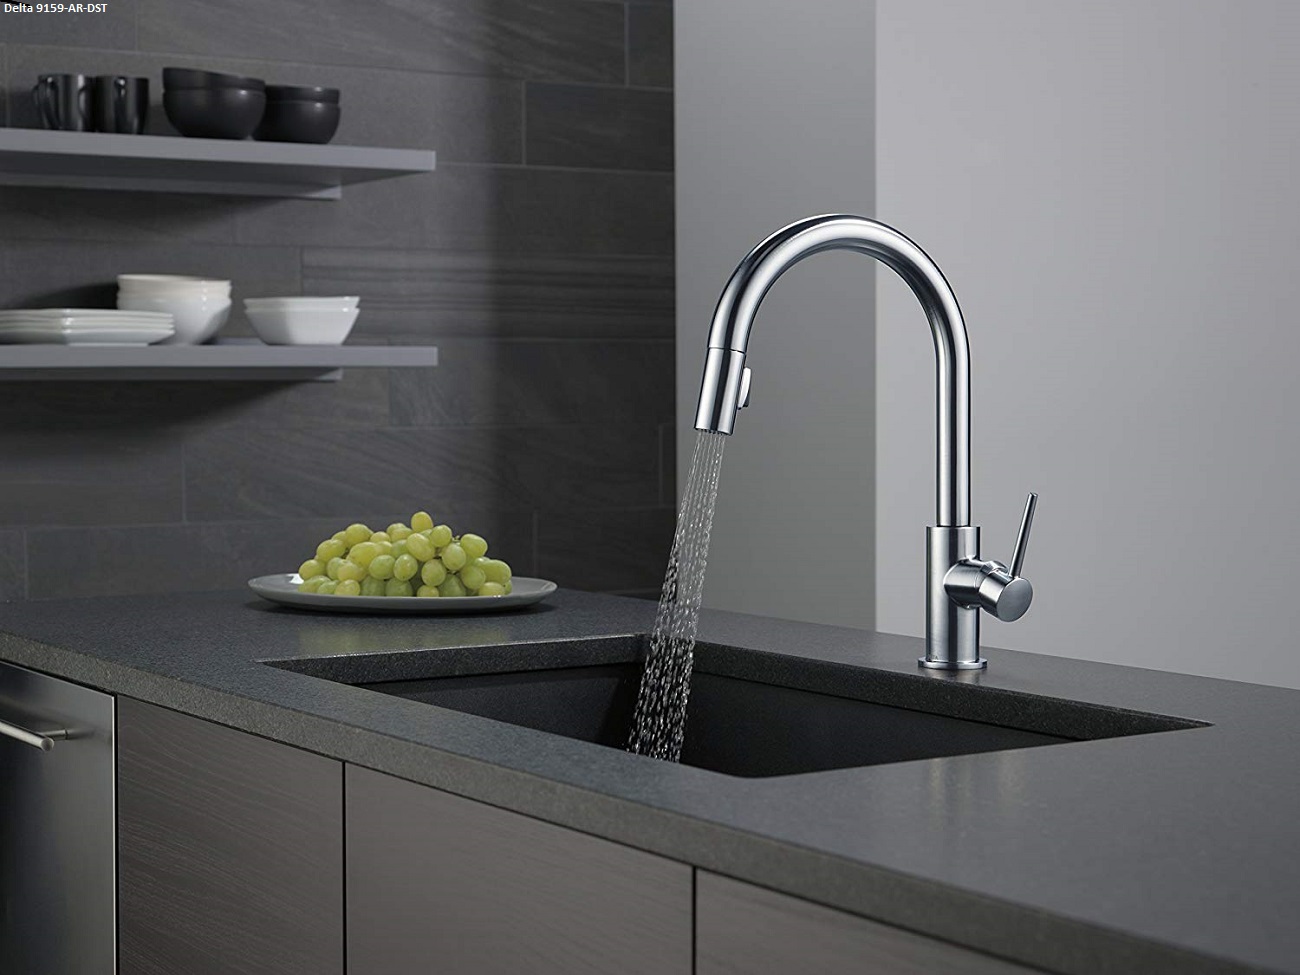 6 Best Kitchen Faucets Under 200 Dollars - Inexpensive and Well-Designed (2023)